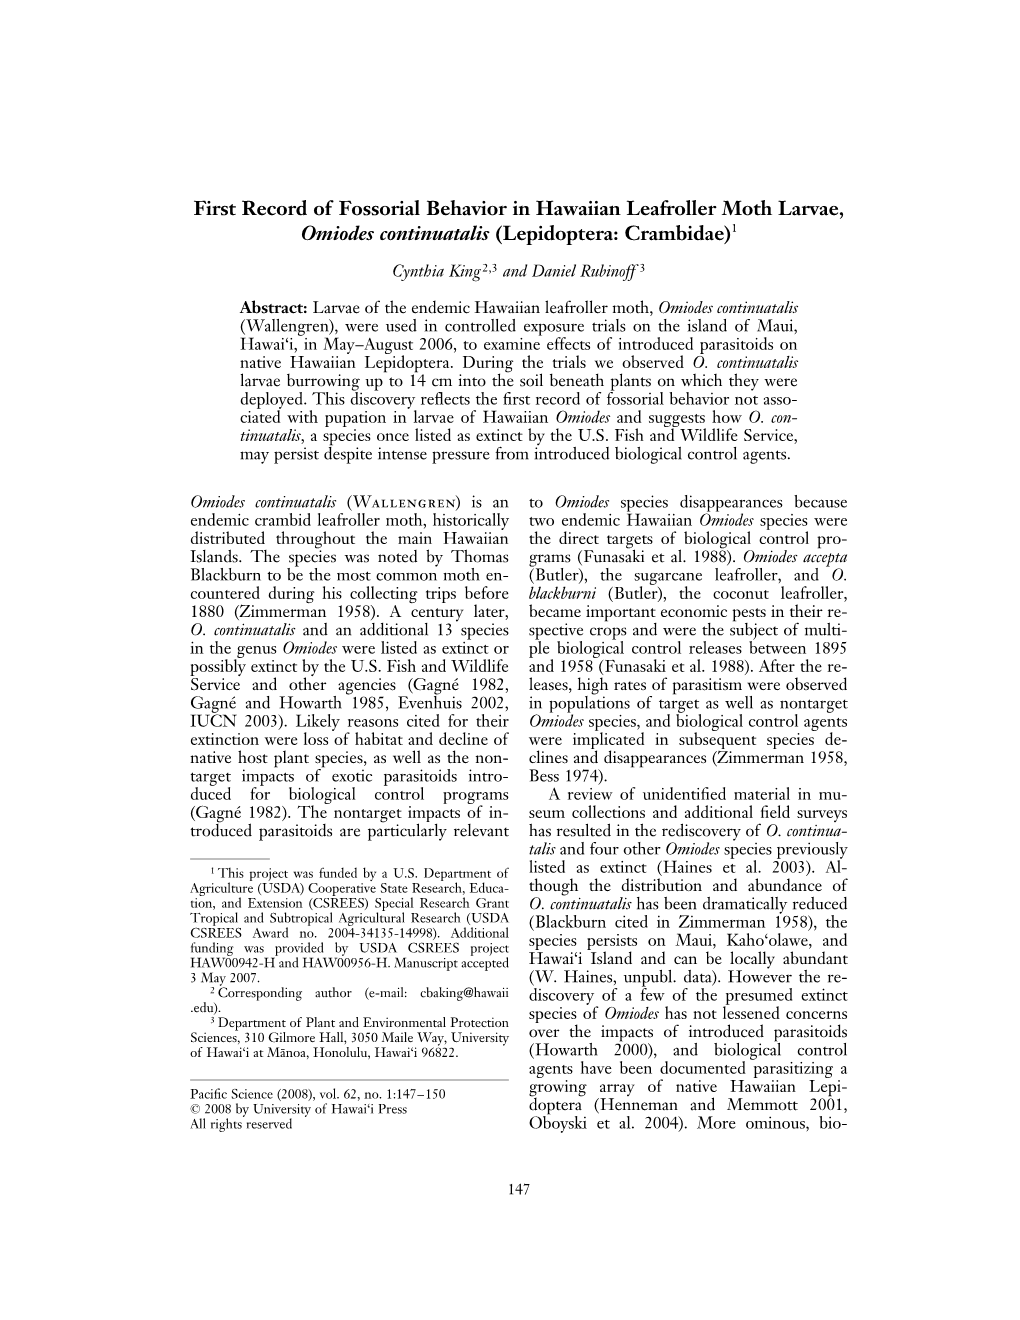 First Record of Fossorial Behavior in Hawaiian Leafroller Moth Larvae, Omiodes Continuatalis (Lepidoptera: Crambidae)1